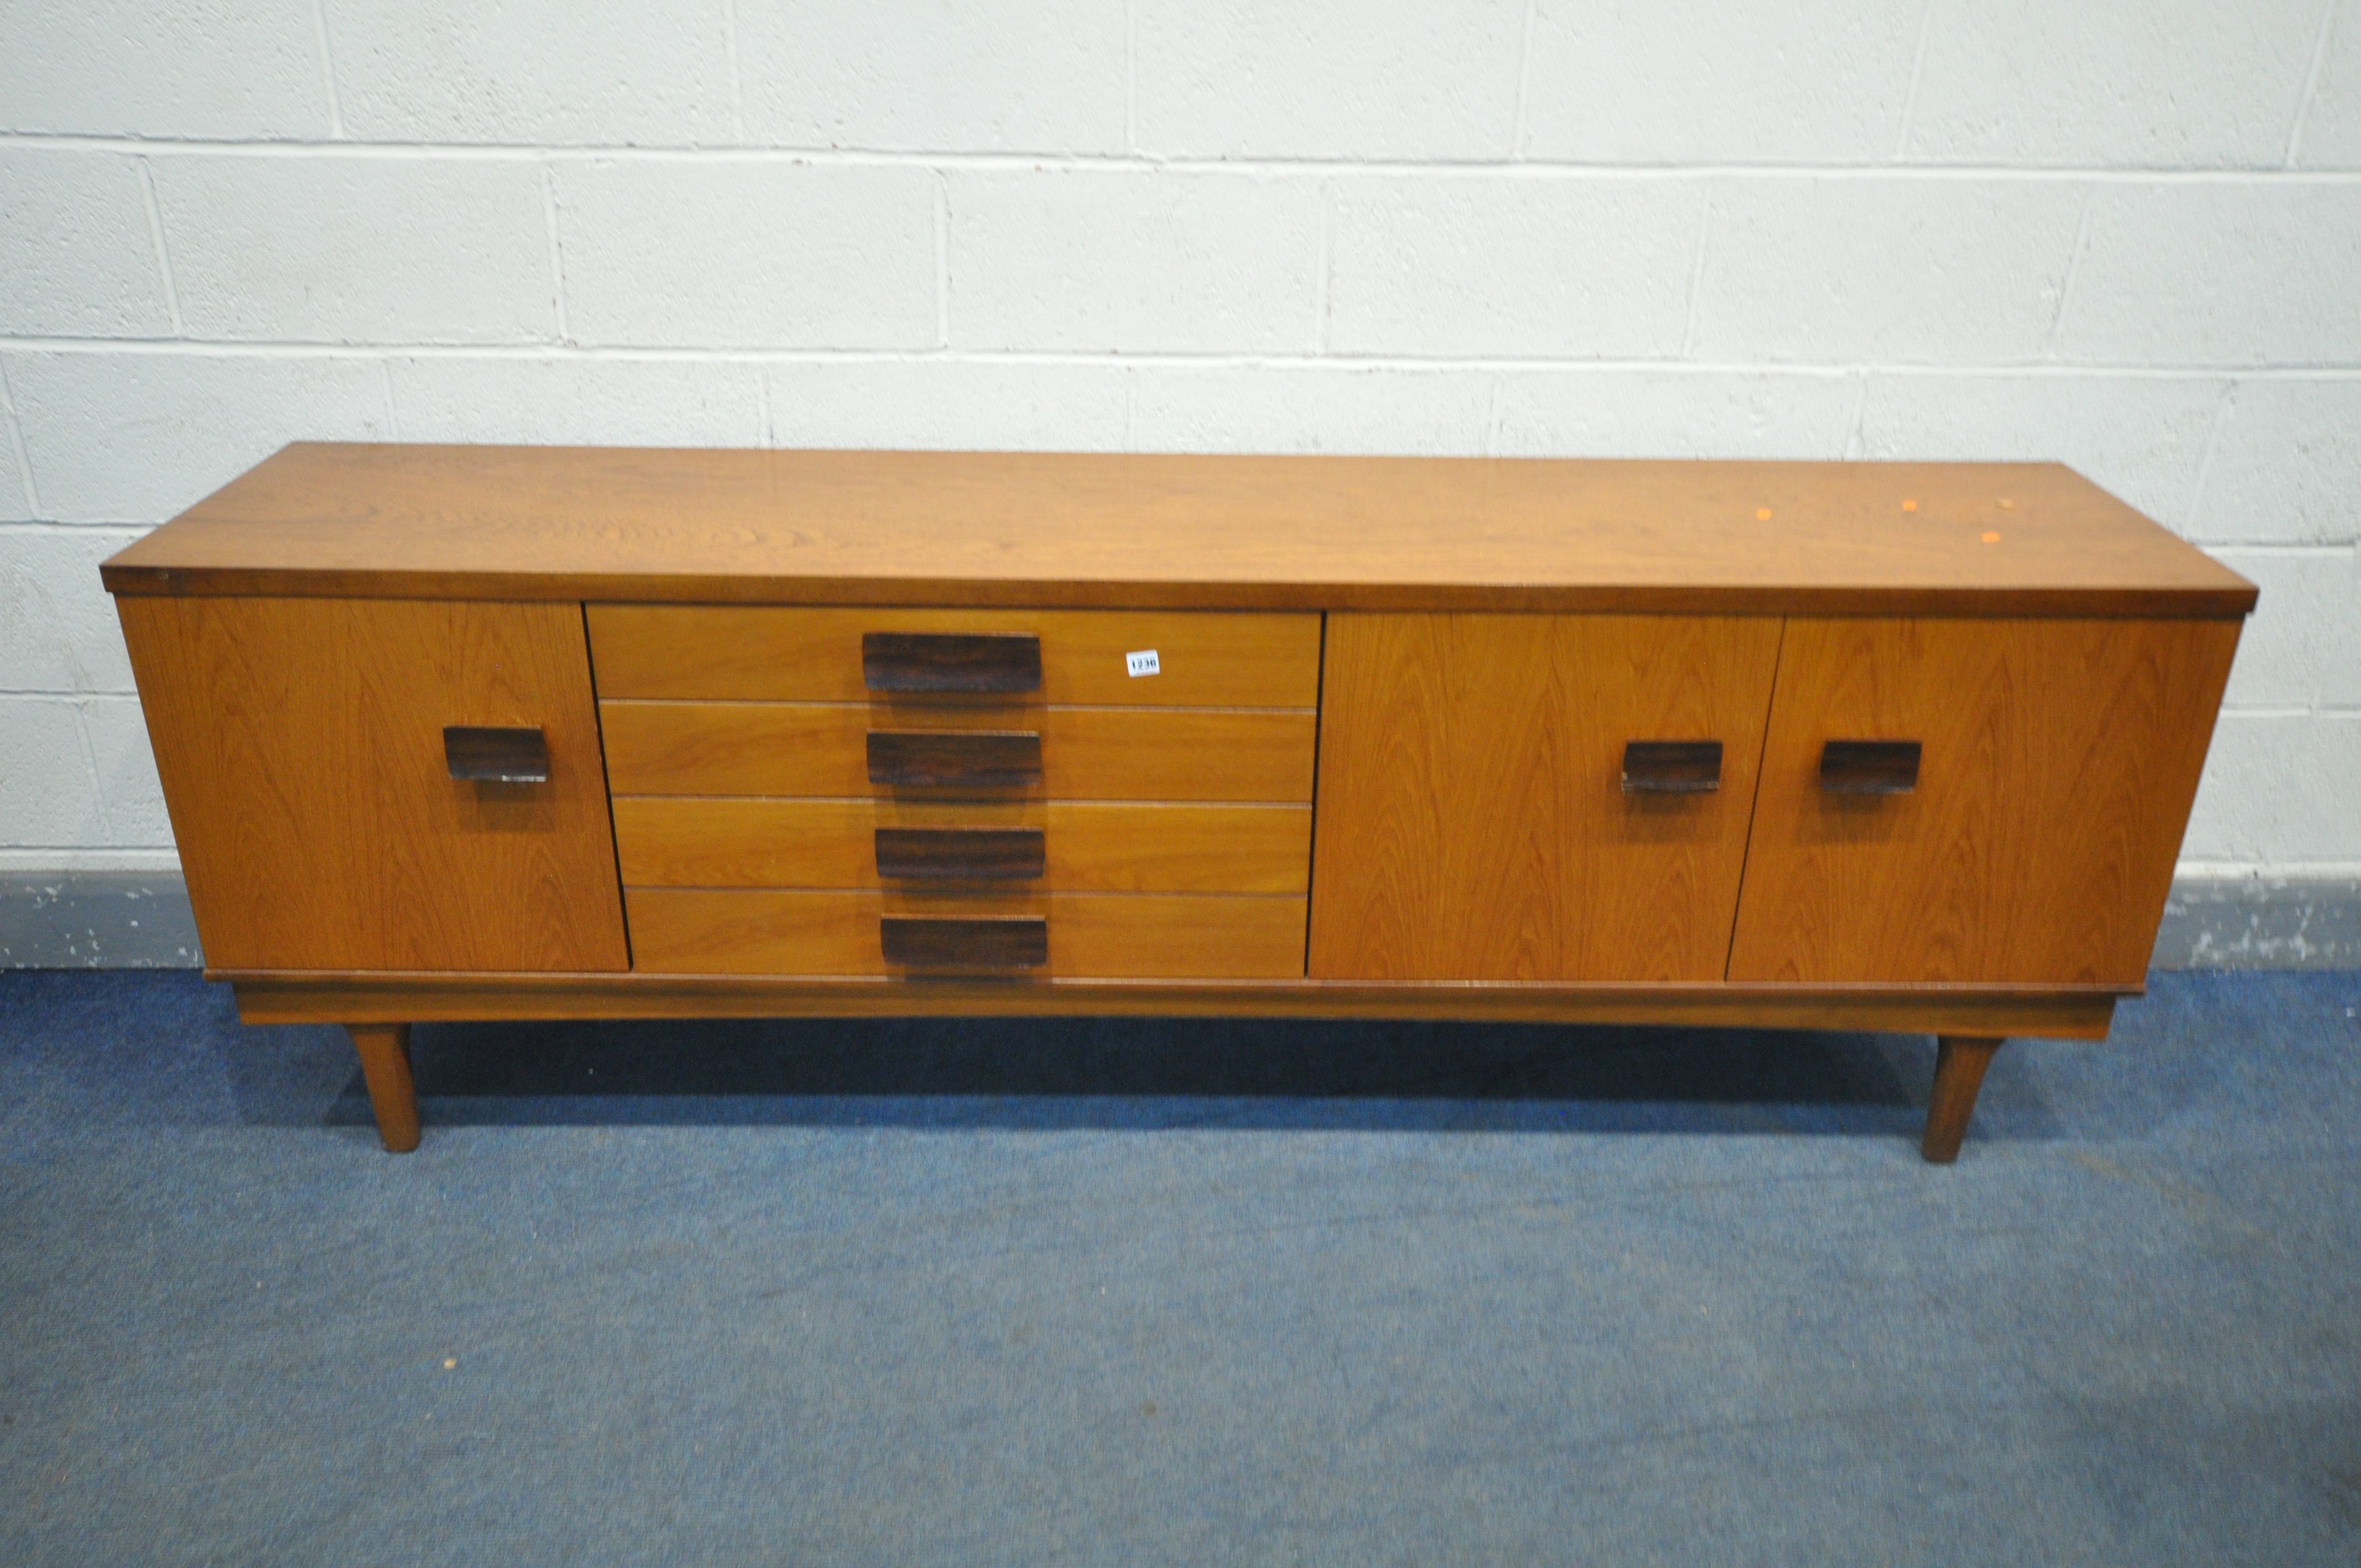 A BATH CABINET MAKERS 1960'S TEAK SIDEABOARD, with a single and double cupboard doors that a both